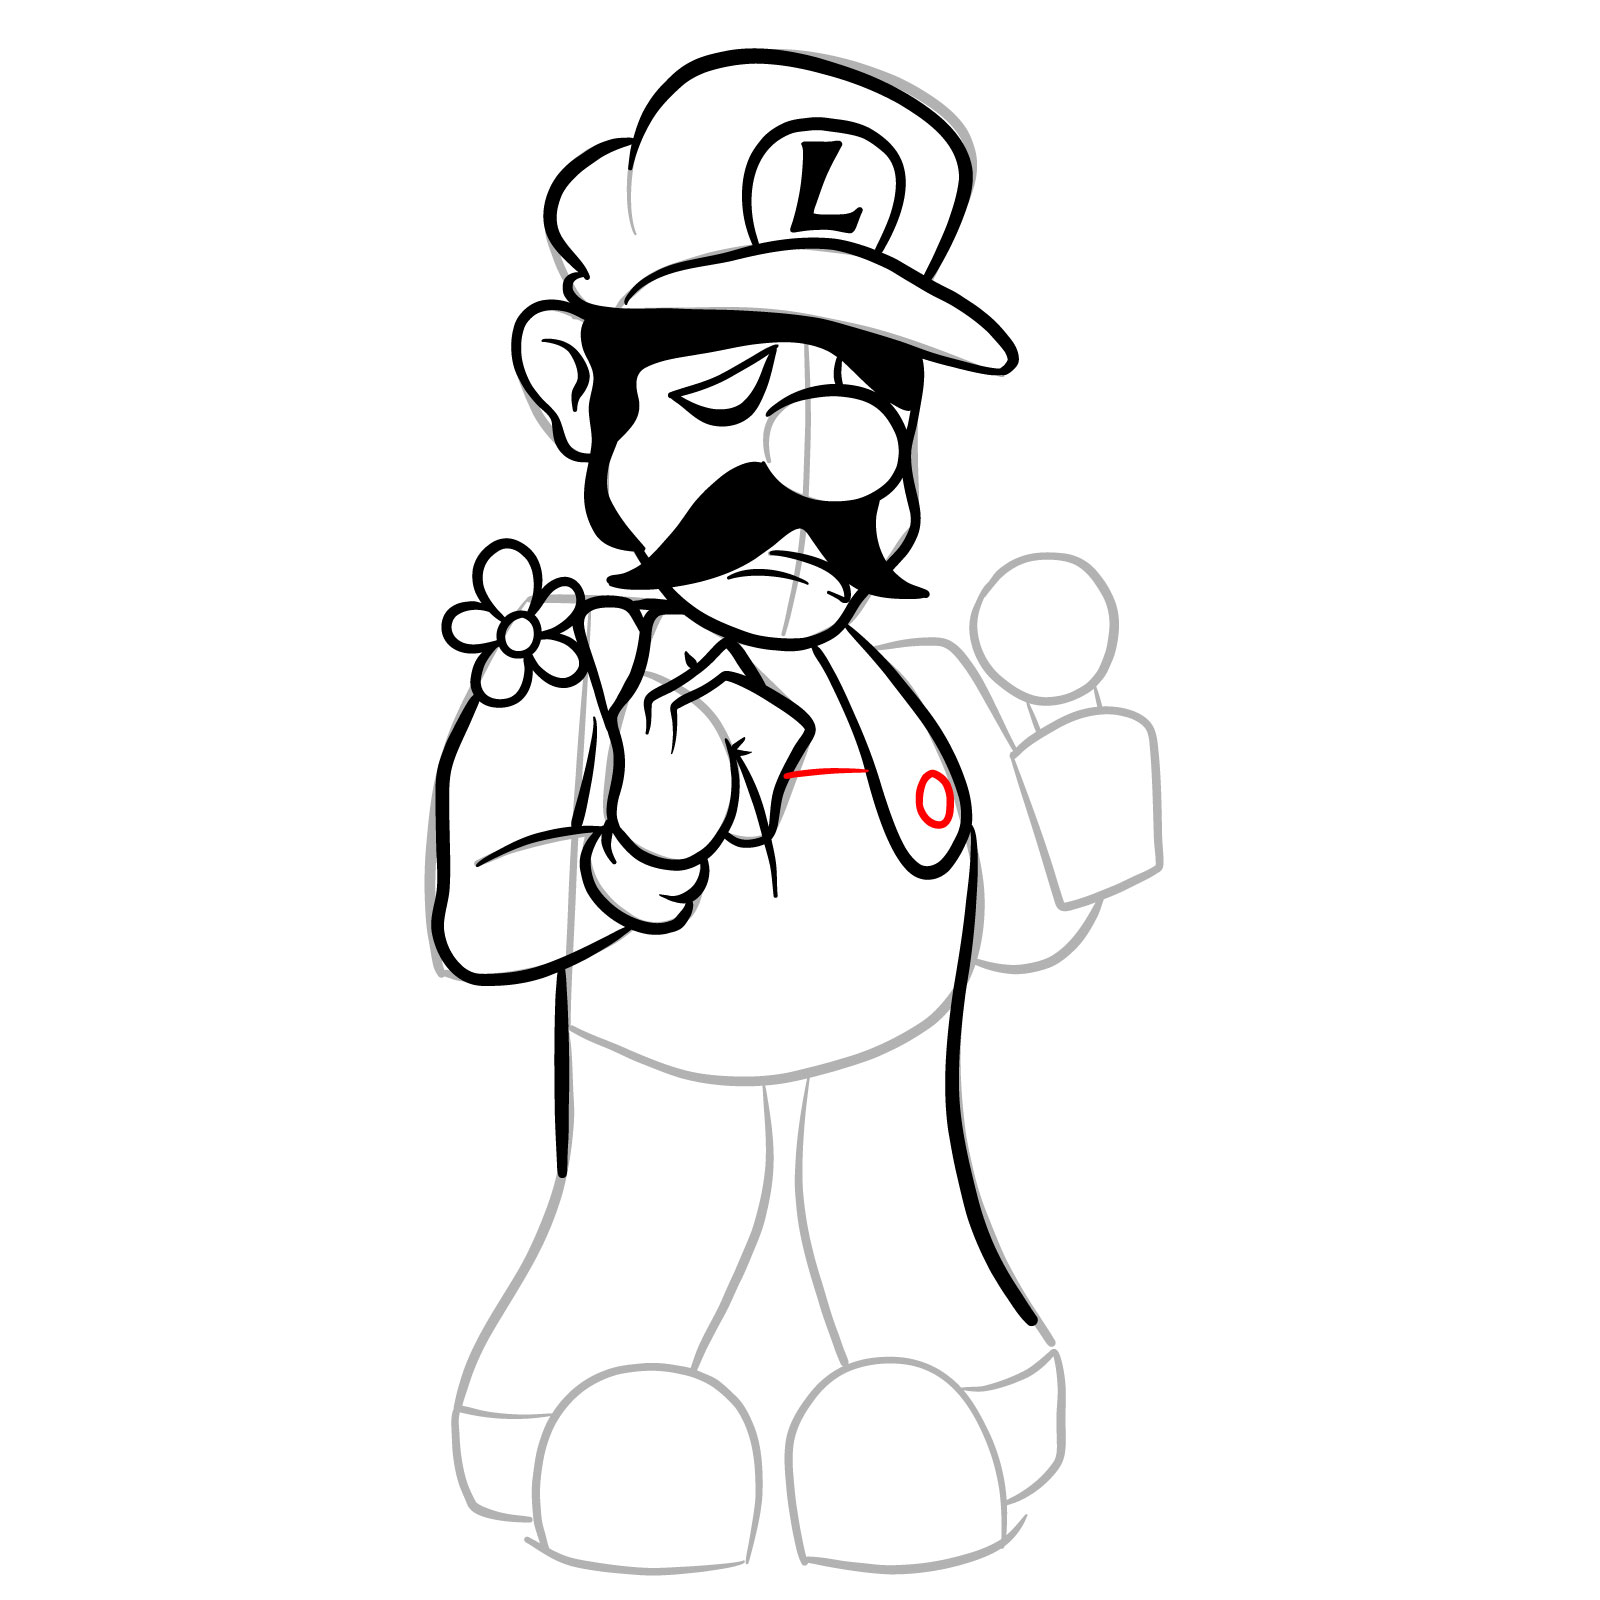 How to draw Beta Luigi from FNF - step 23